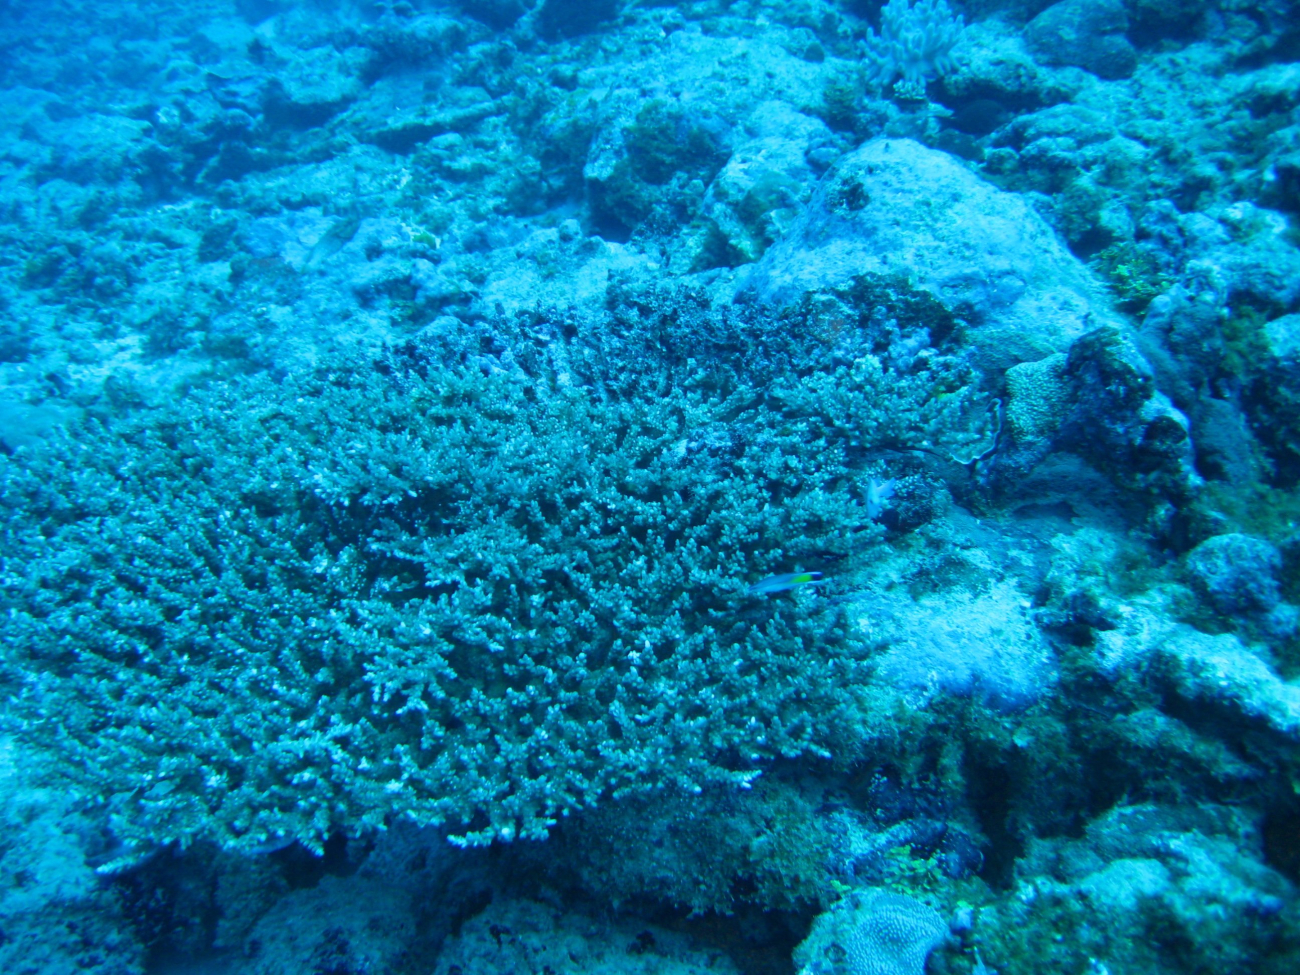 Reef scene with coral (Acropora pulchra)